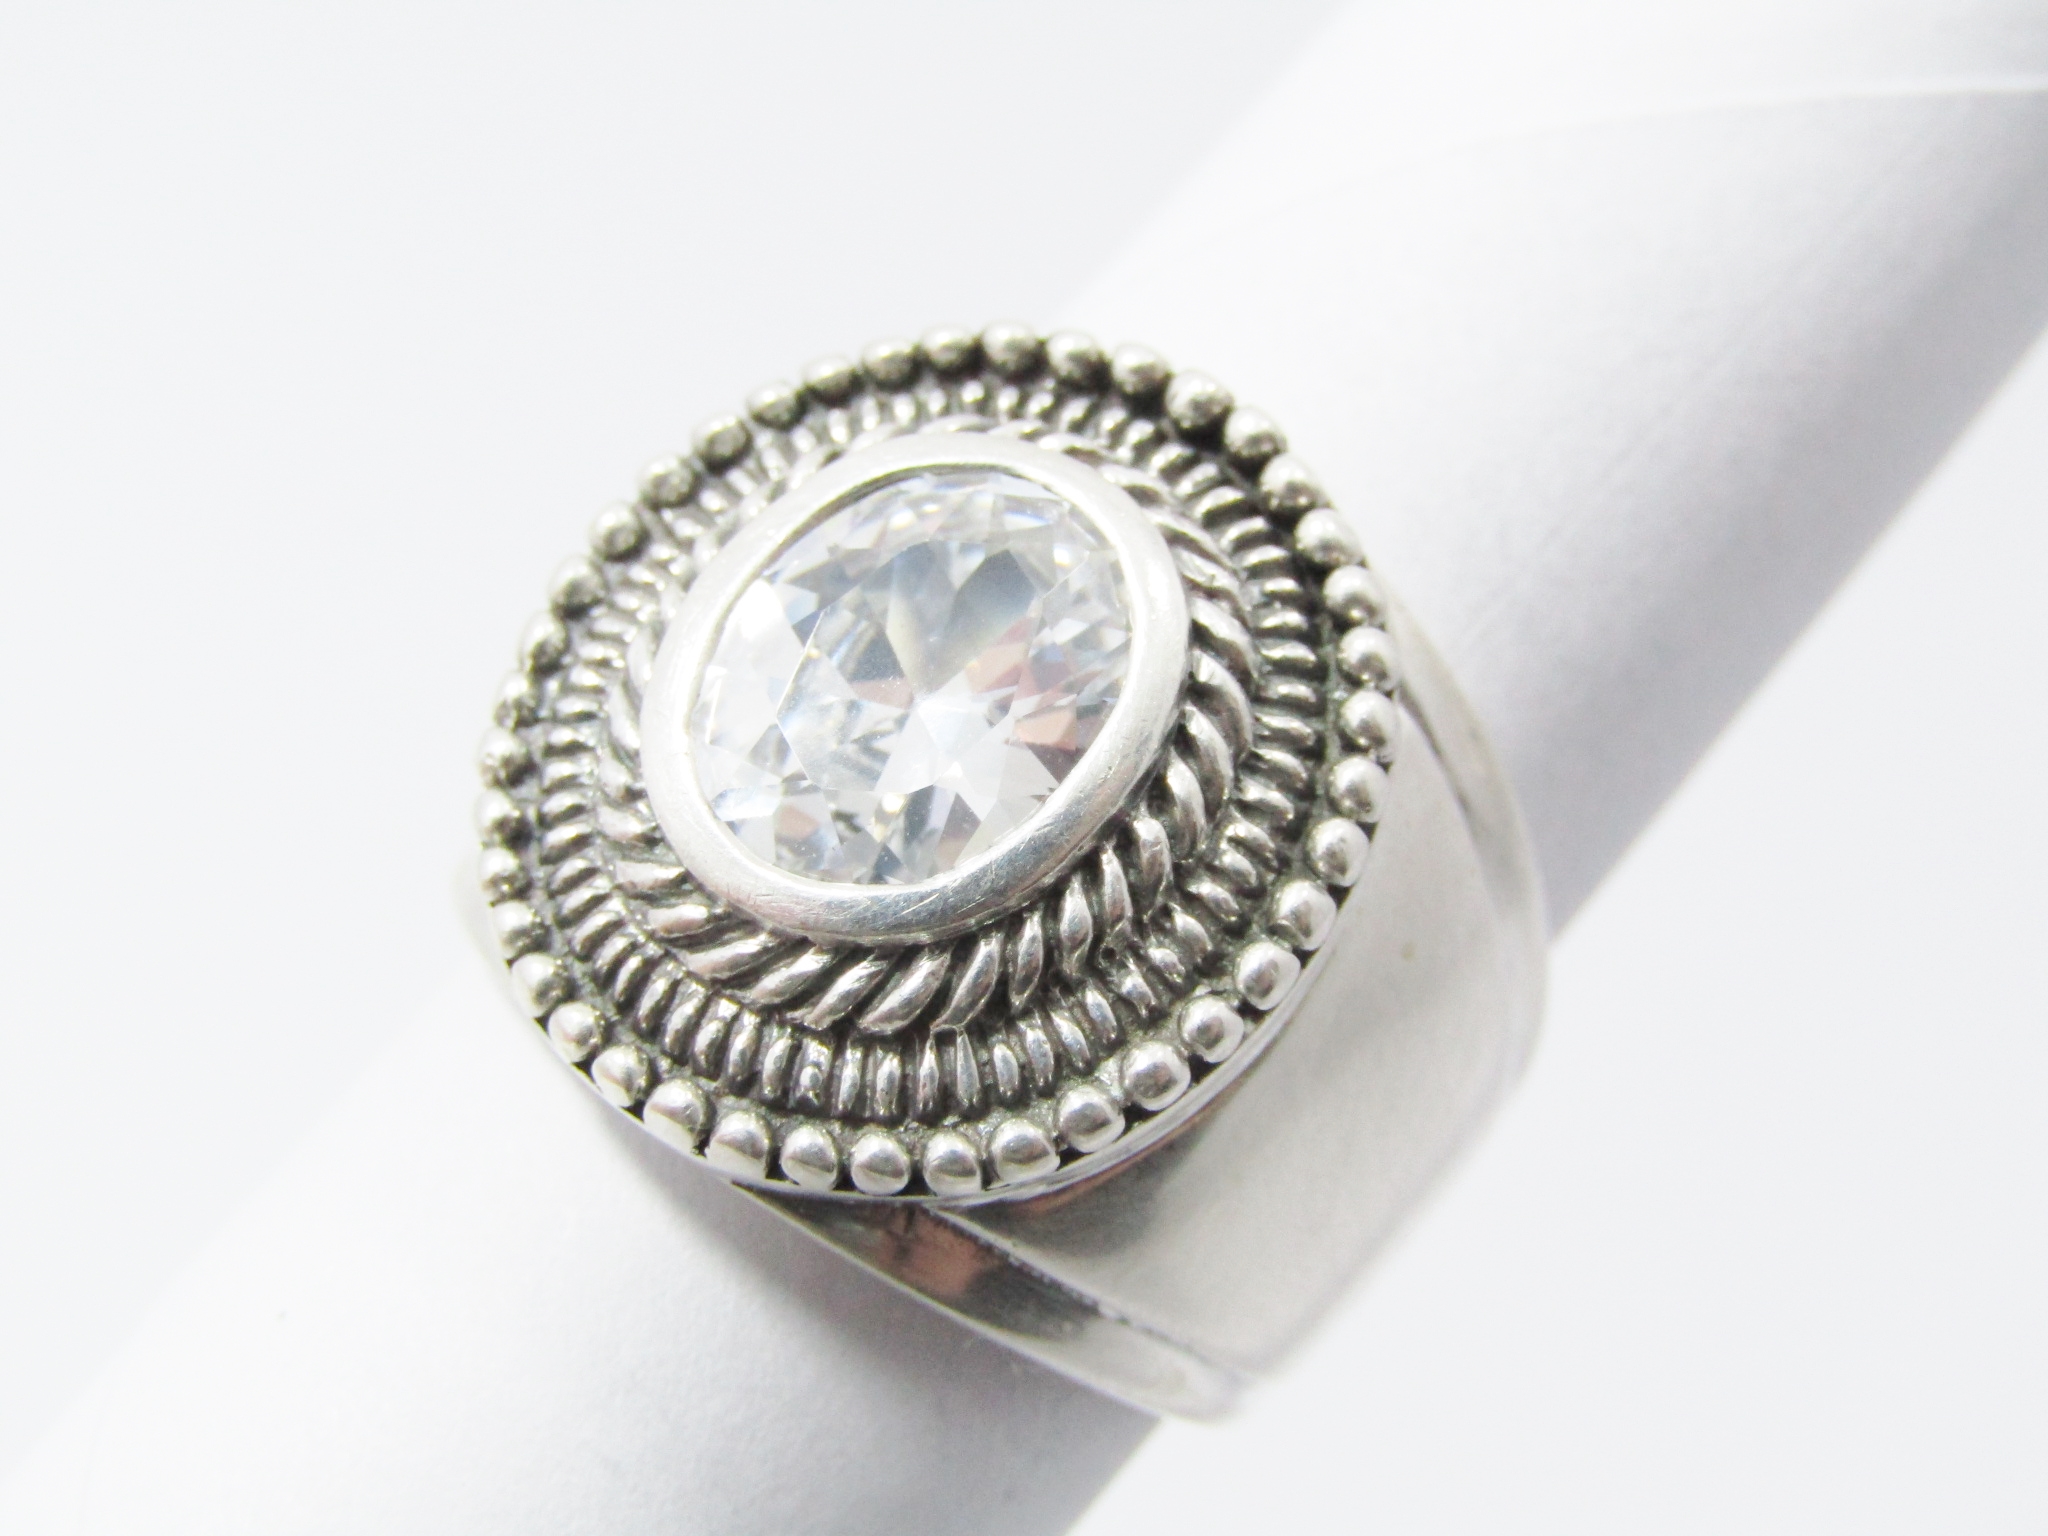 A Stunning Huge Zirconia Ring in Sterling Silver